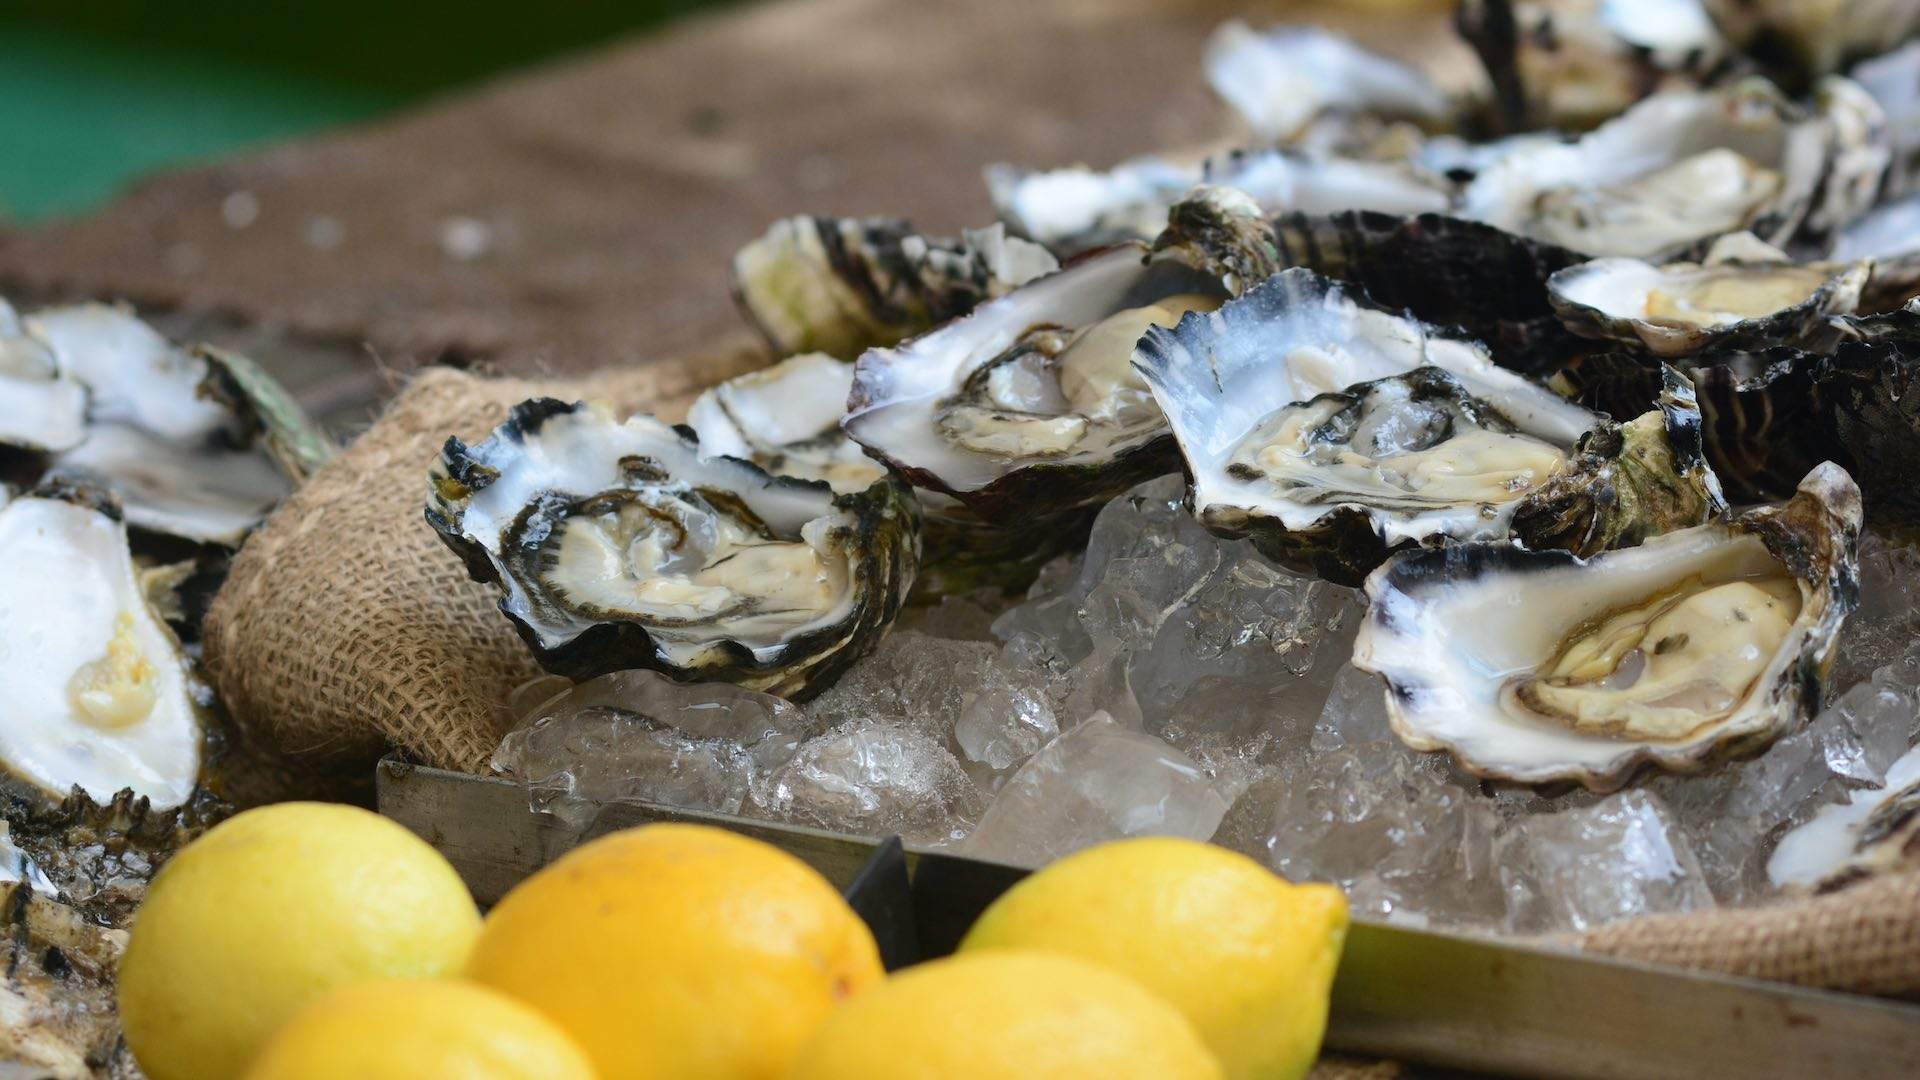 A plate of fresh oysters.